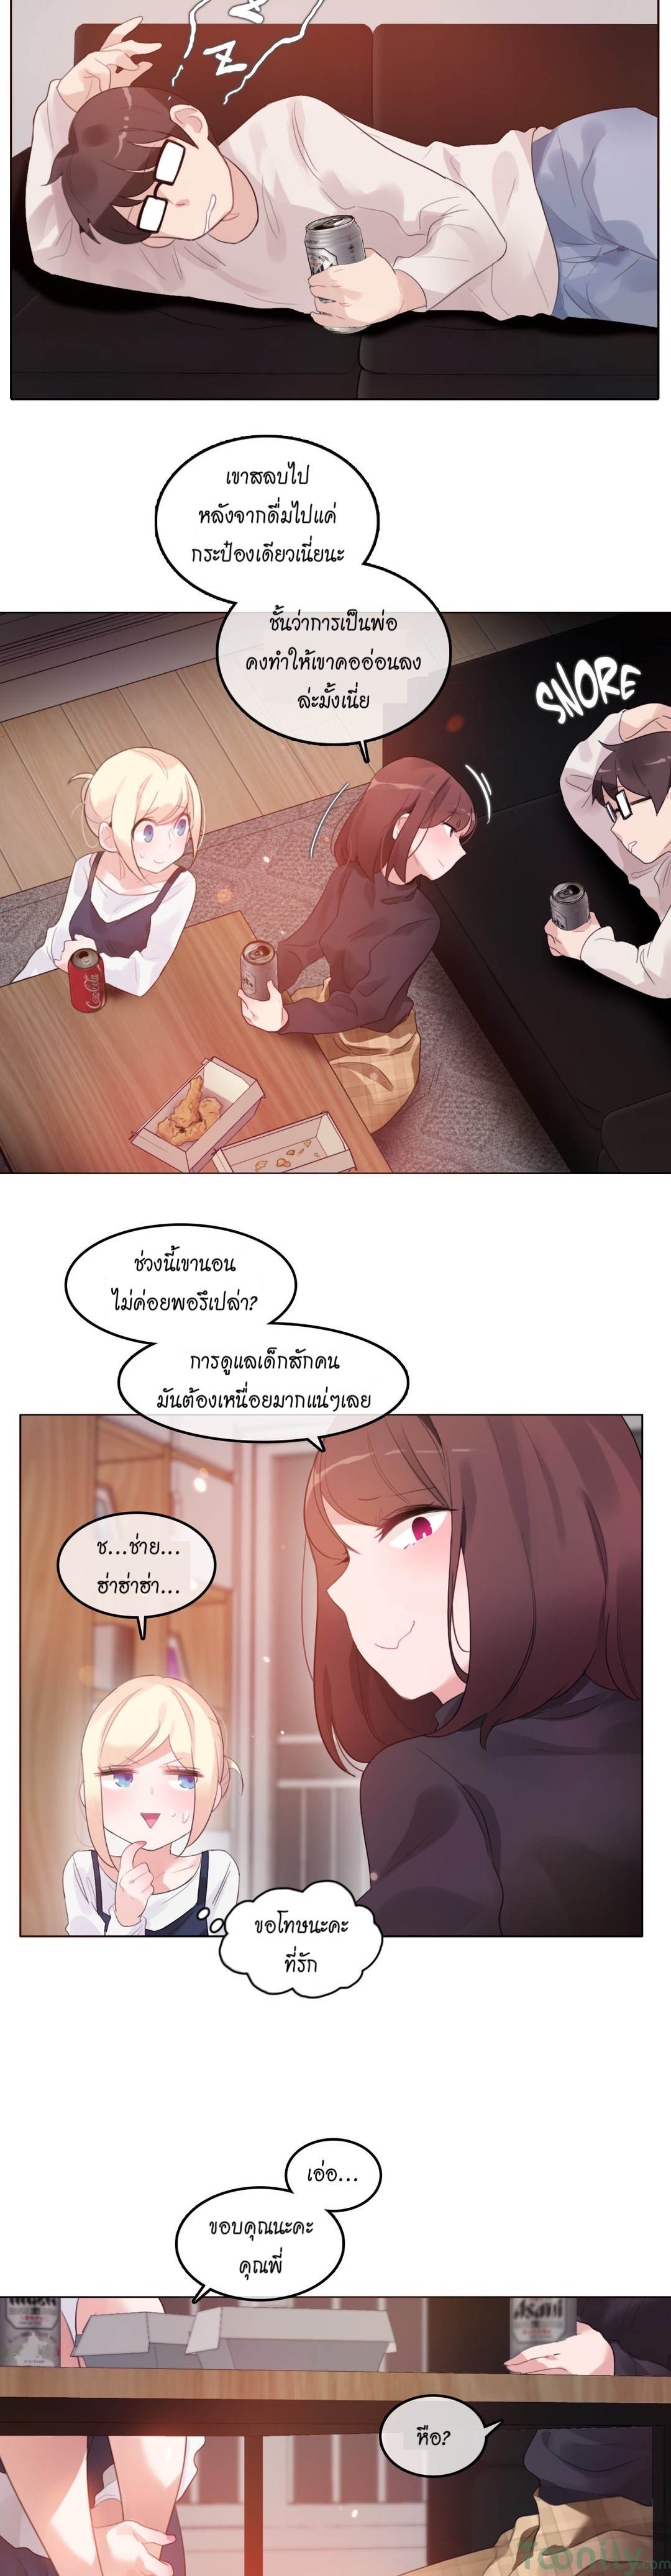 A Pervert’s Daily Life62 (4)